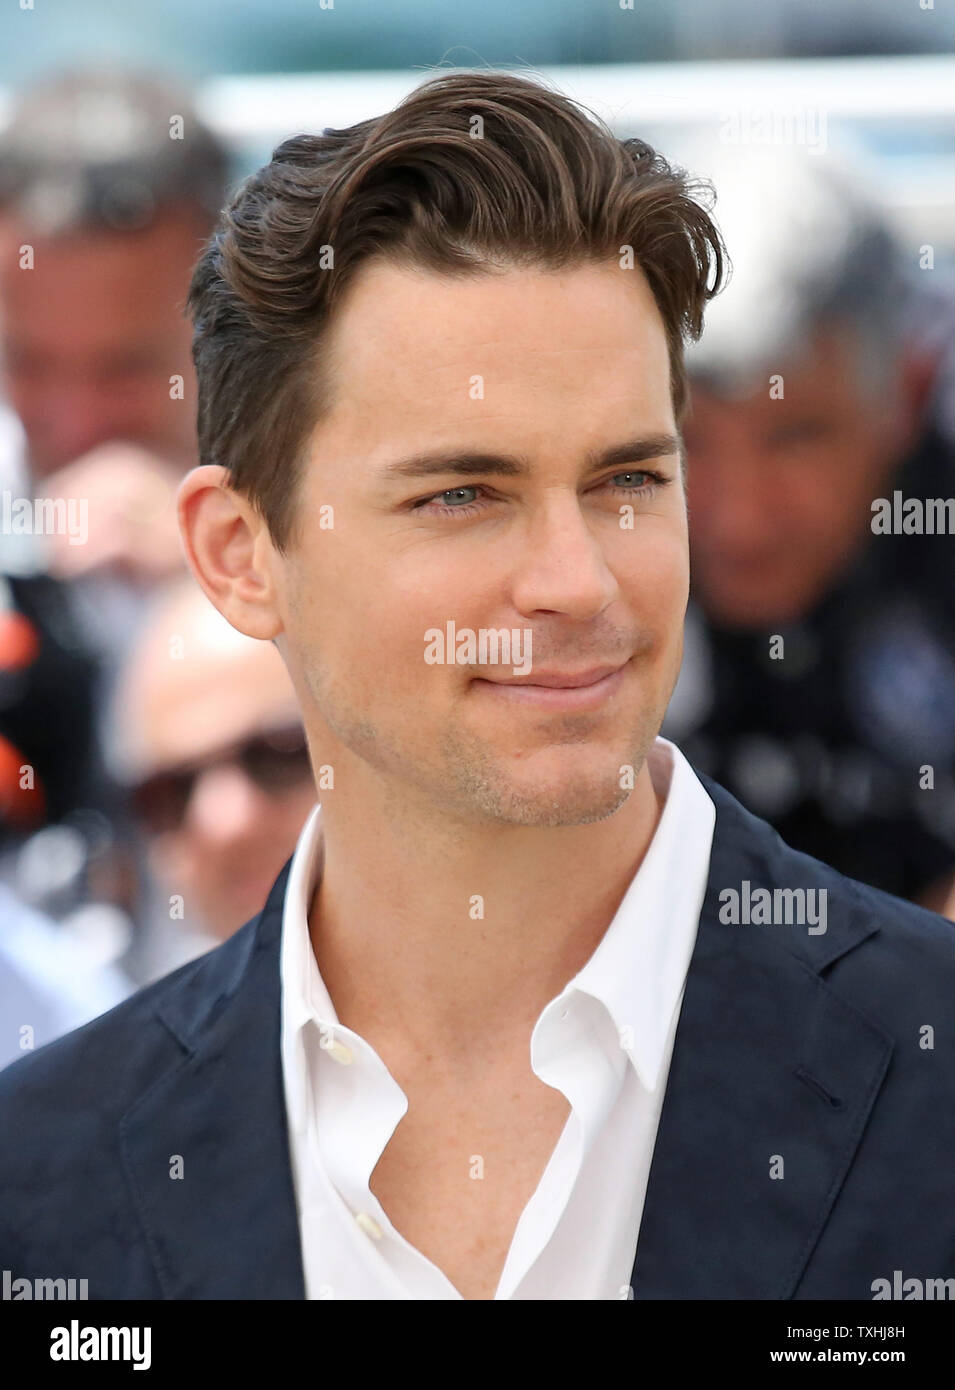 Matt Bomer arrives at a photocall for the film "The Nice Guys" during the  69th annual